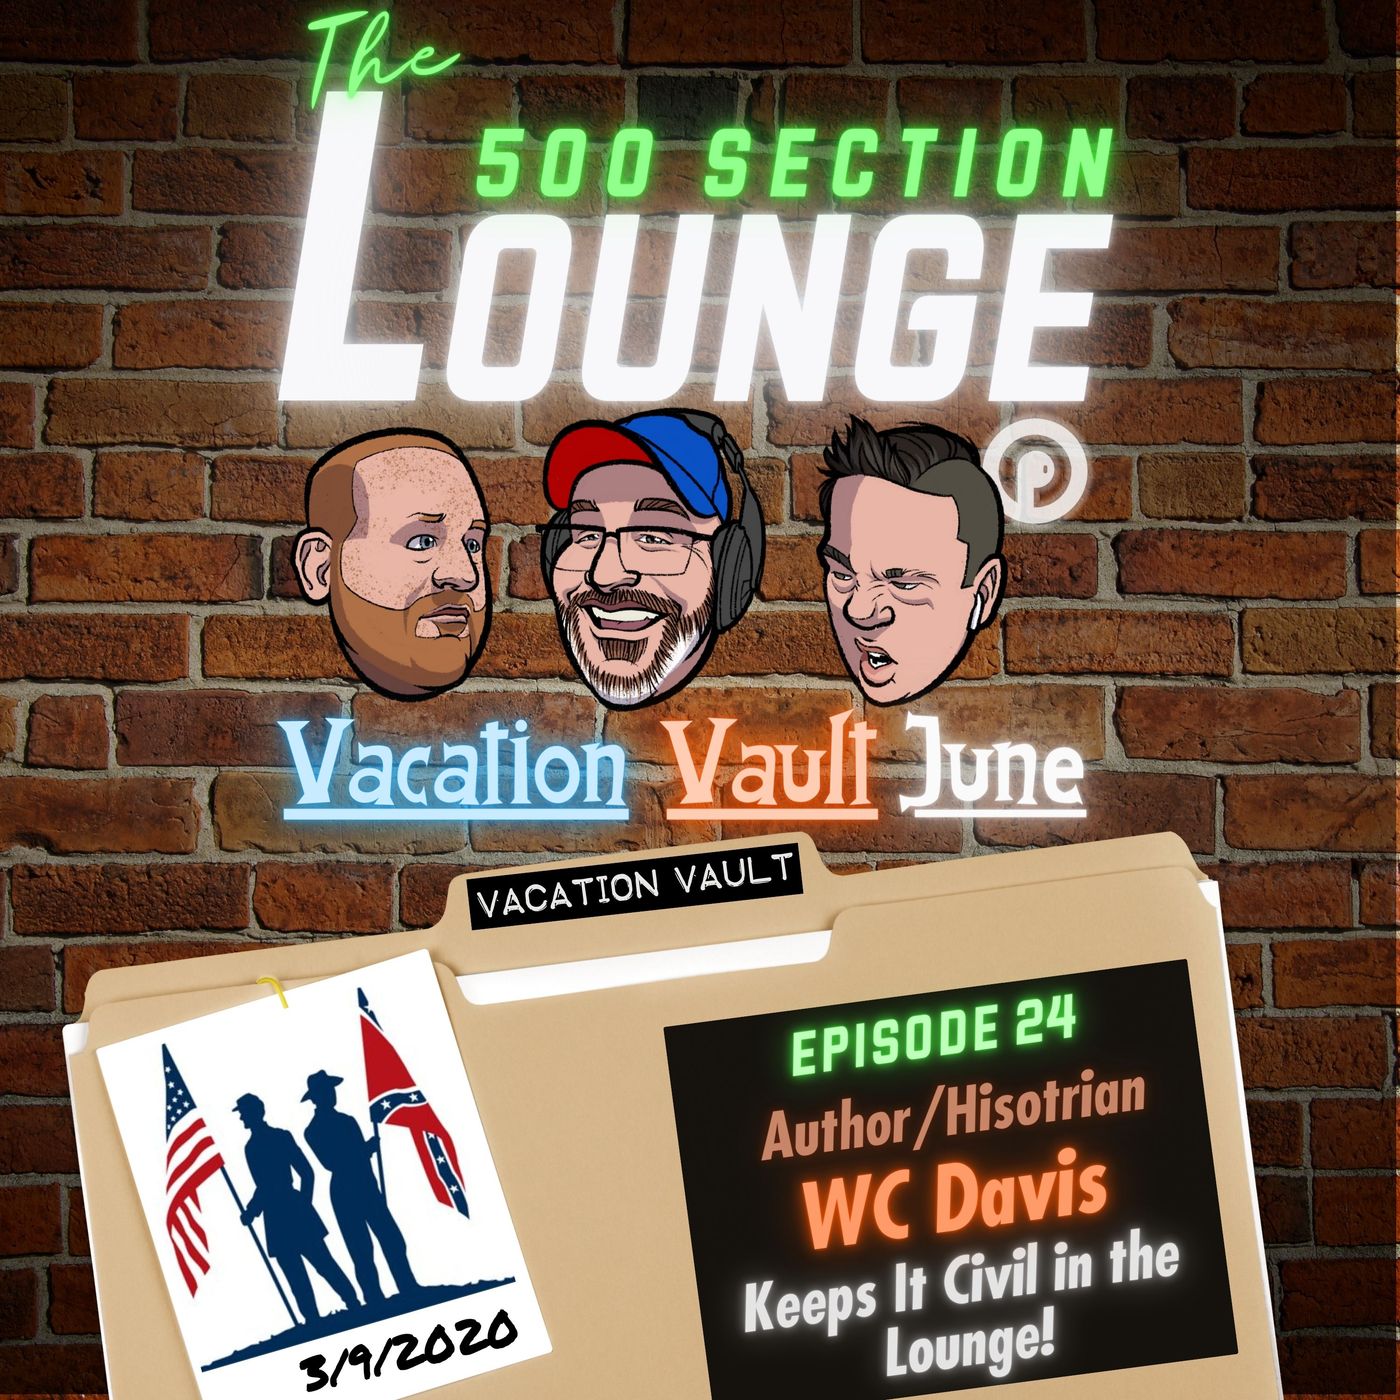 E135: Vacation Vault June- WC Davis Keeps It Civil In the Lounge! Image